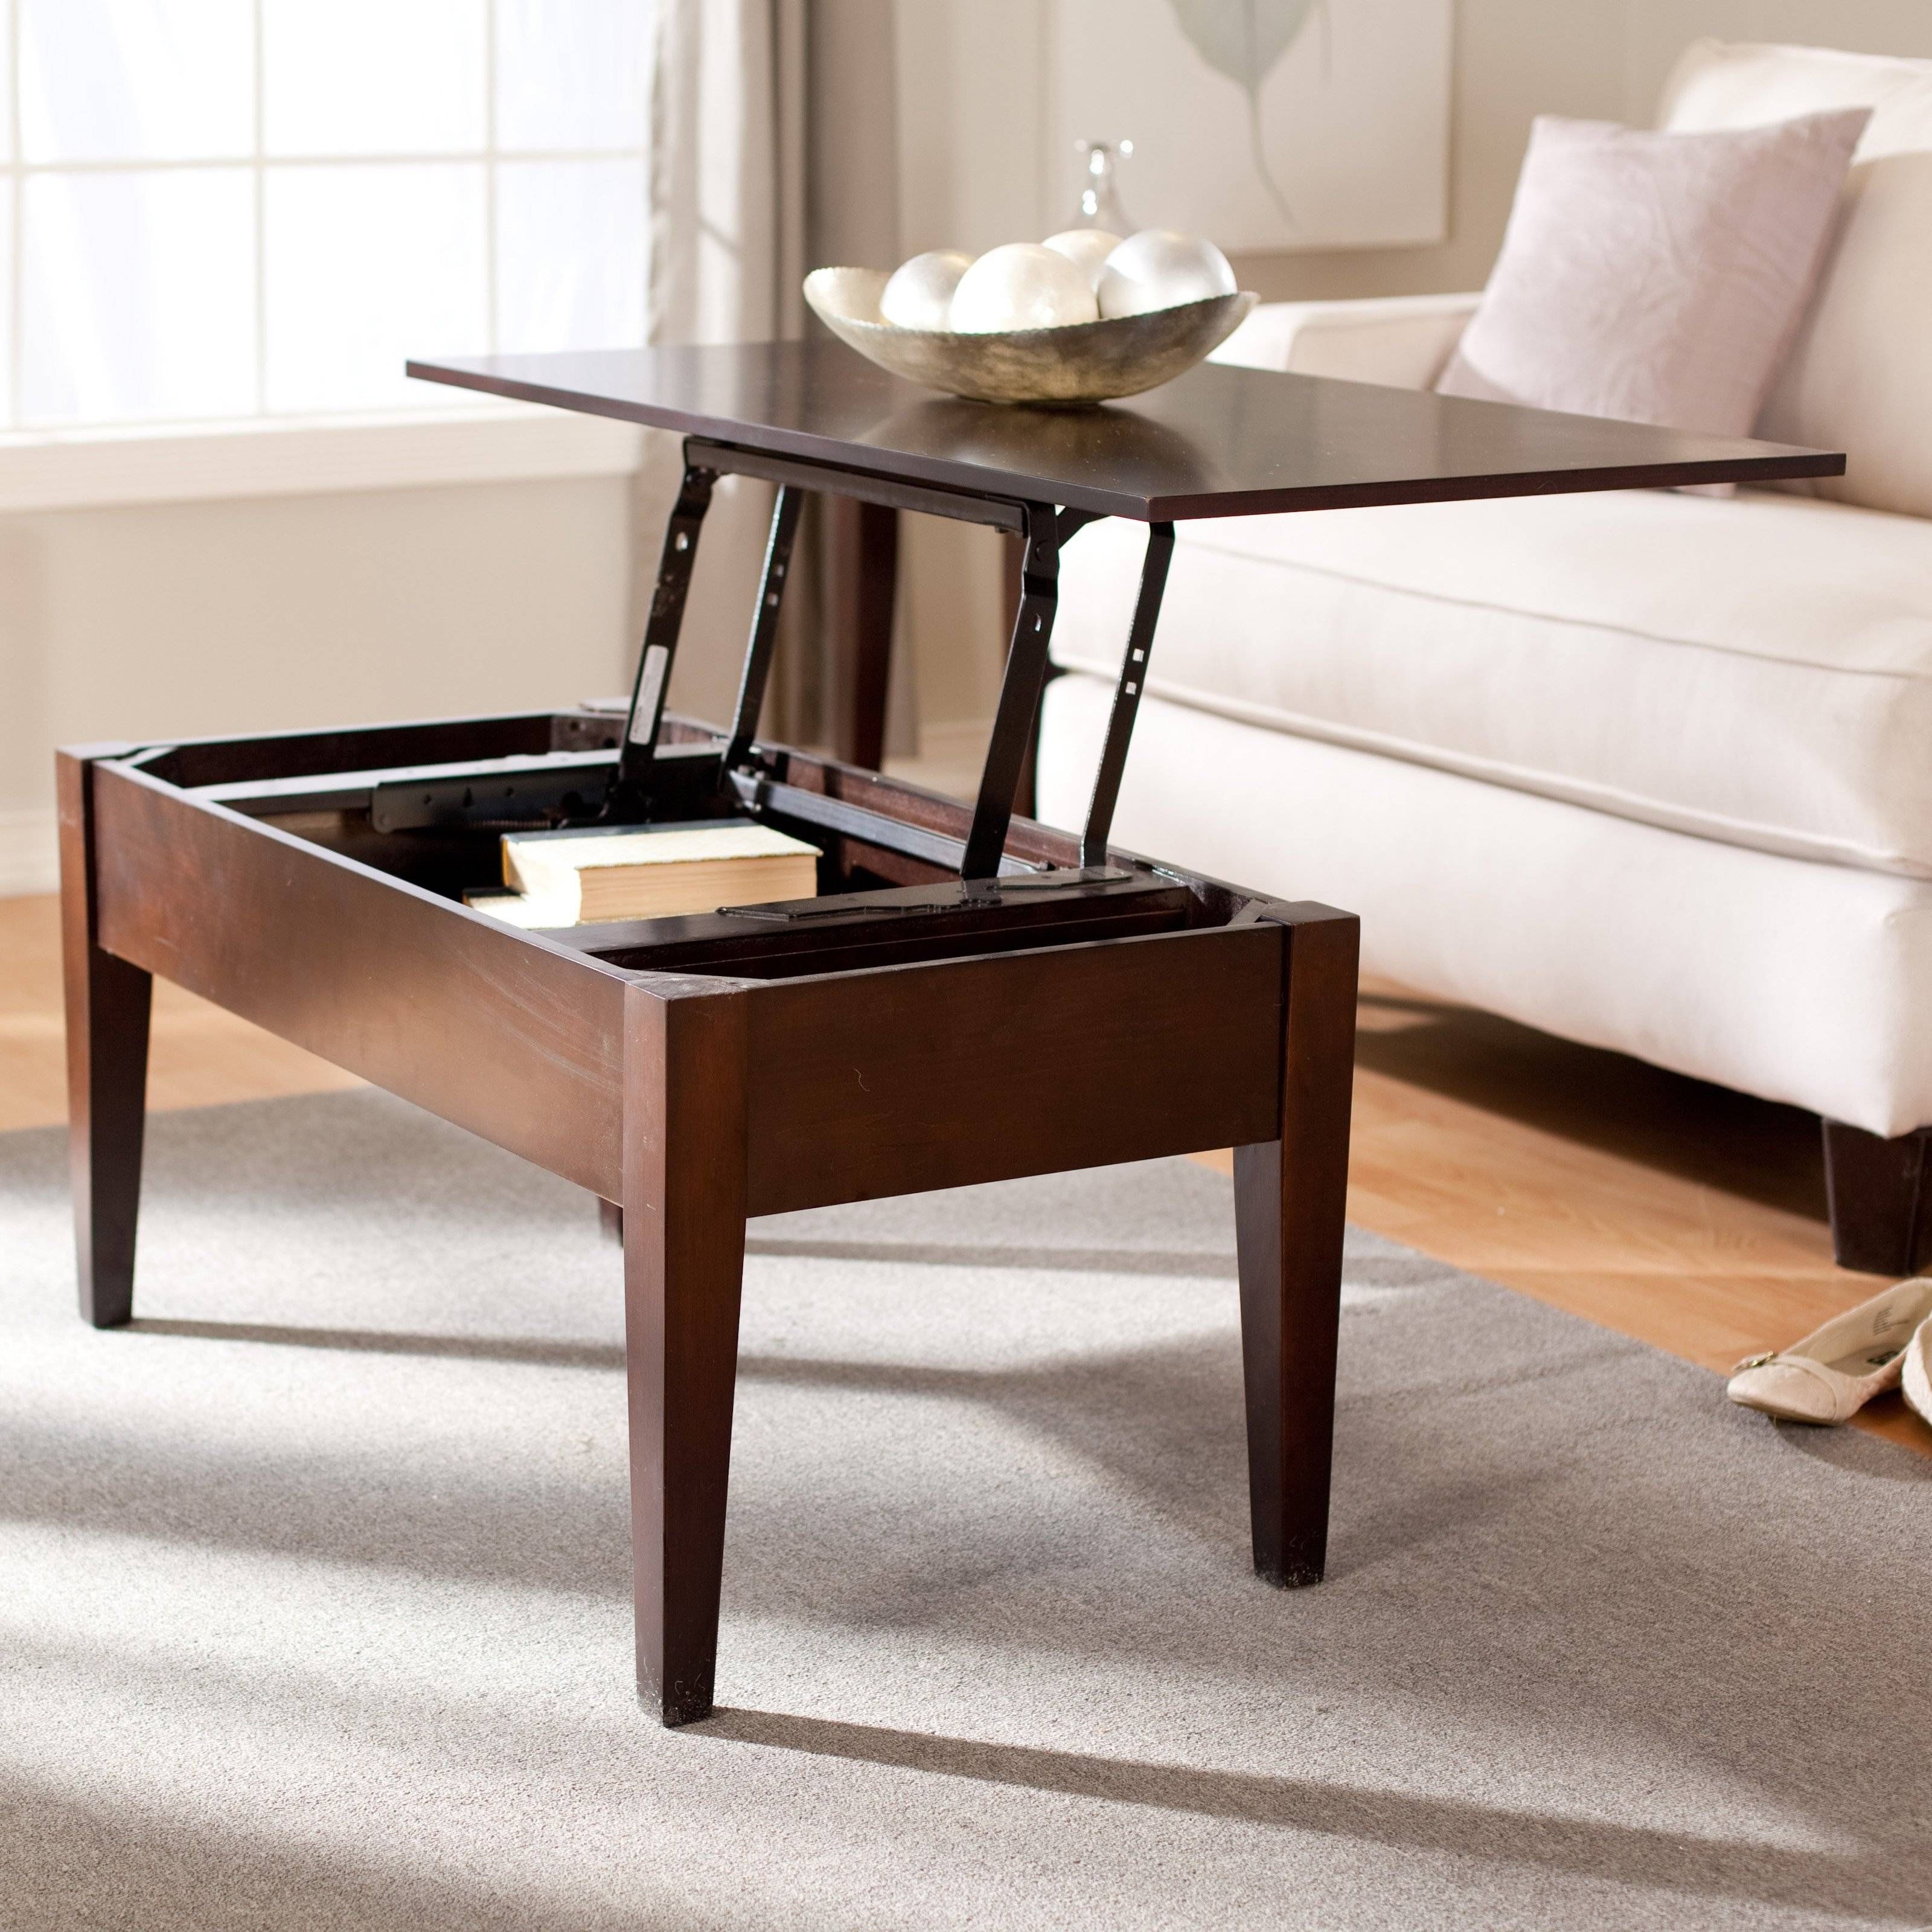 Turner Lift Top Coffee Table – Espresso | Hayneedle In Coffee Table With Raised Top (Photo 3 of 30)